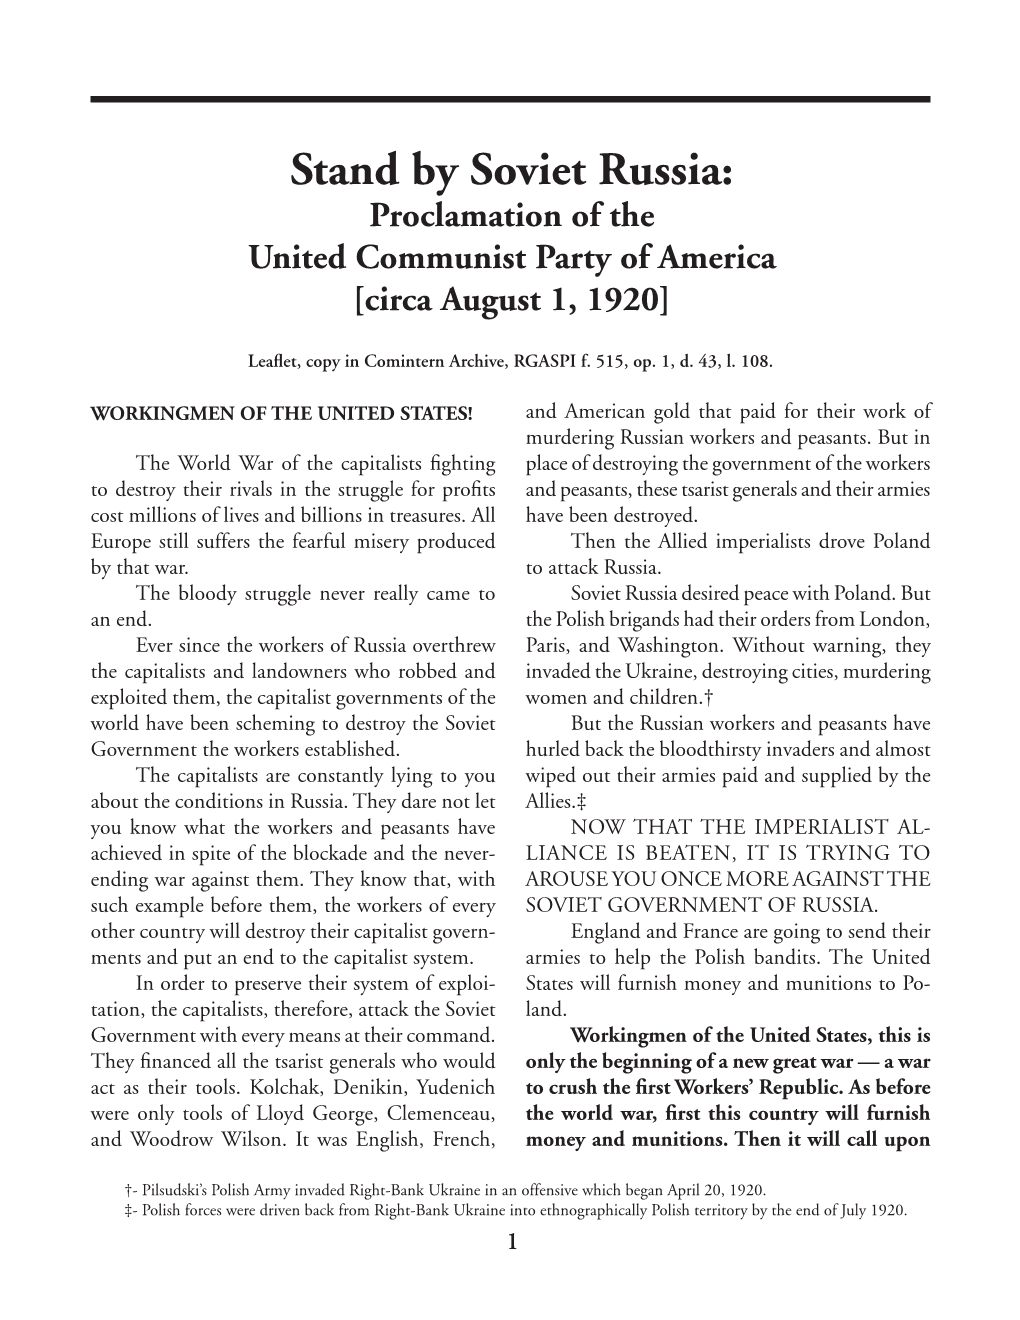 Stand by Soviet Russia: Proclamation of the United Communist Party of America [Circa August 1, 1920]